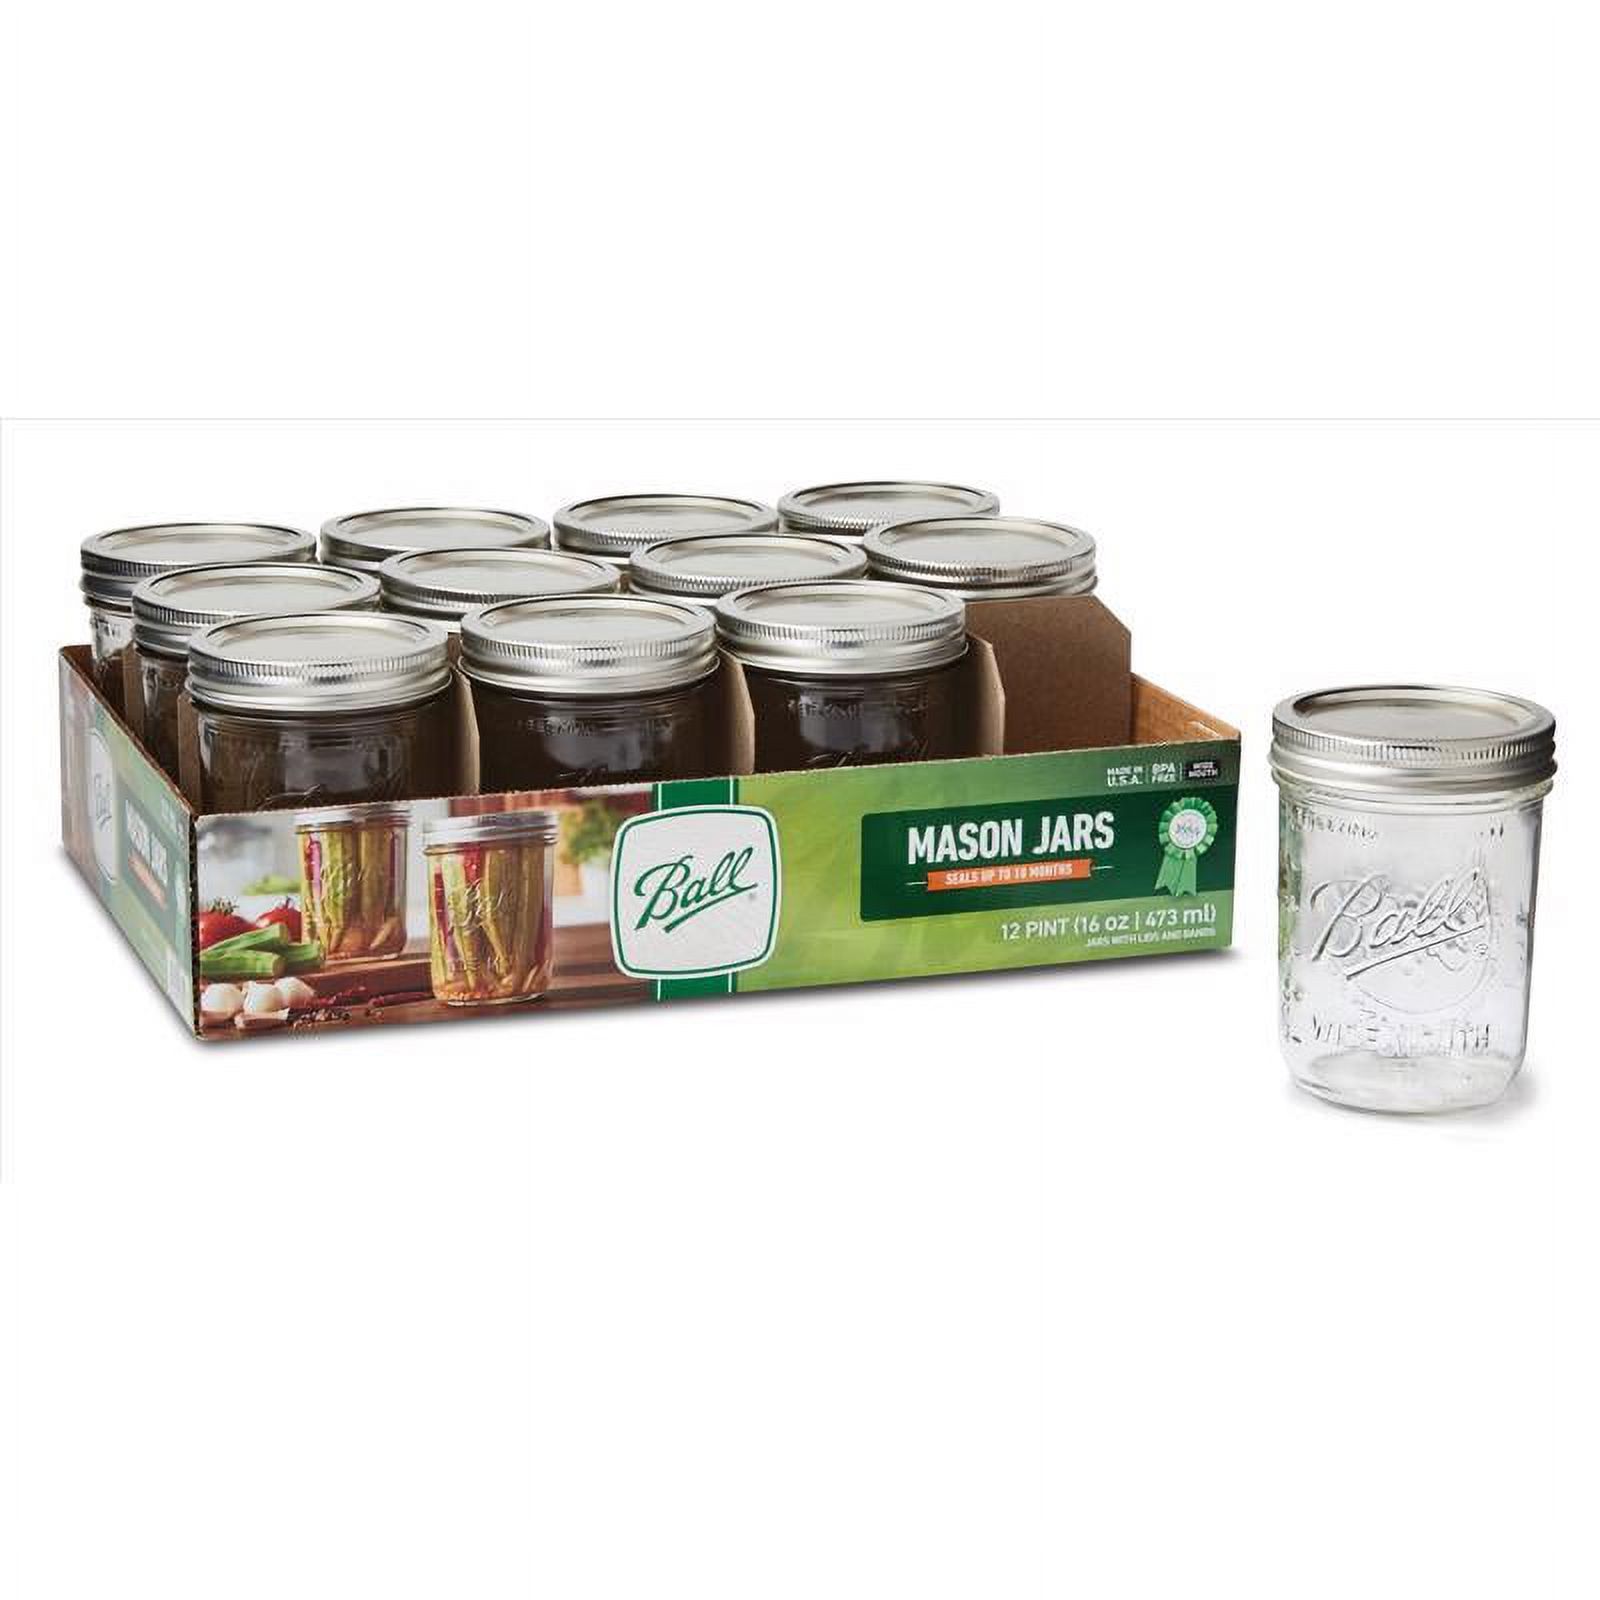 Ball, Glass Mason Jars with Lids & Bands, Wide Mouth, Clear, 16 oz, 12 Count - image 3 of 7